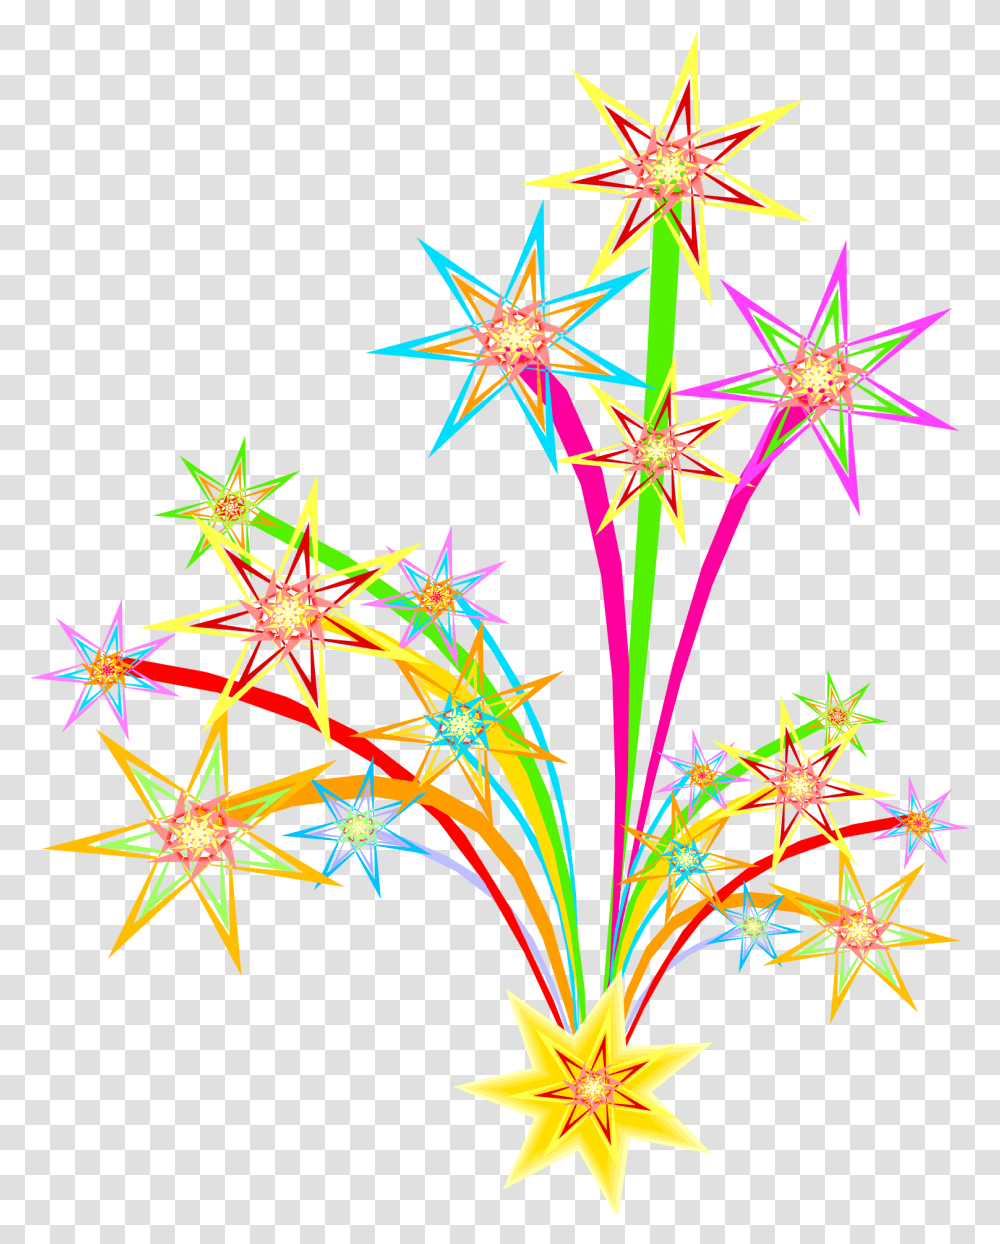 Download Hd Bonfire Display Pencil And In Color New Years Fireworks Clip Art, Ornament, Pattern, Fractal, Lighting Transparent Png